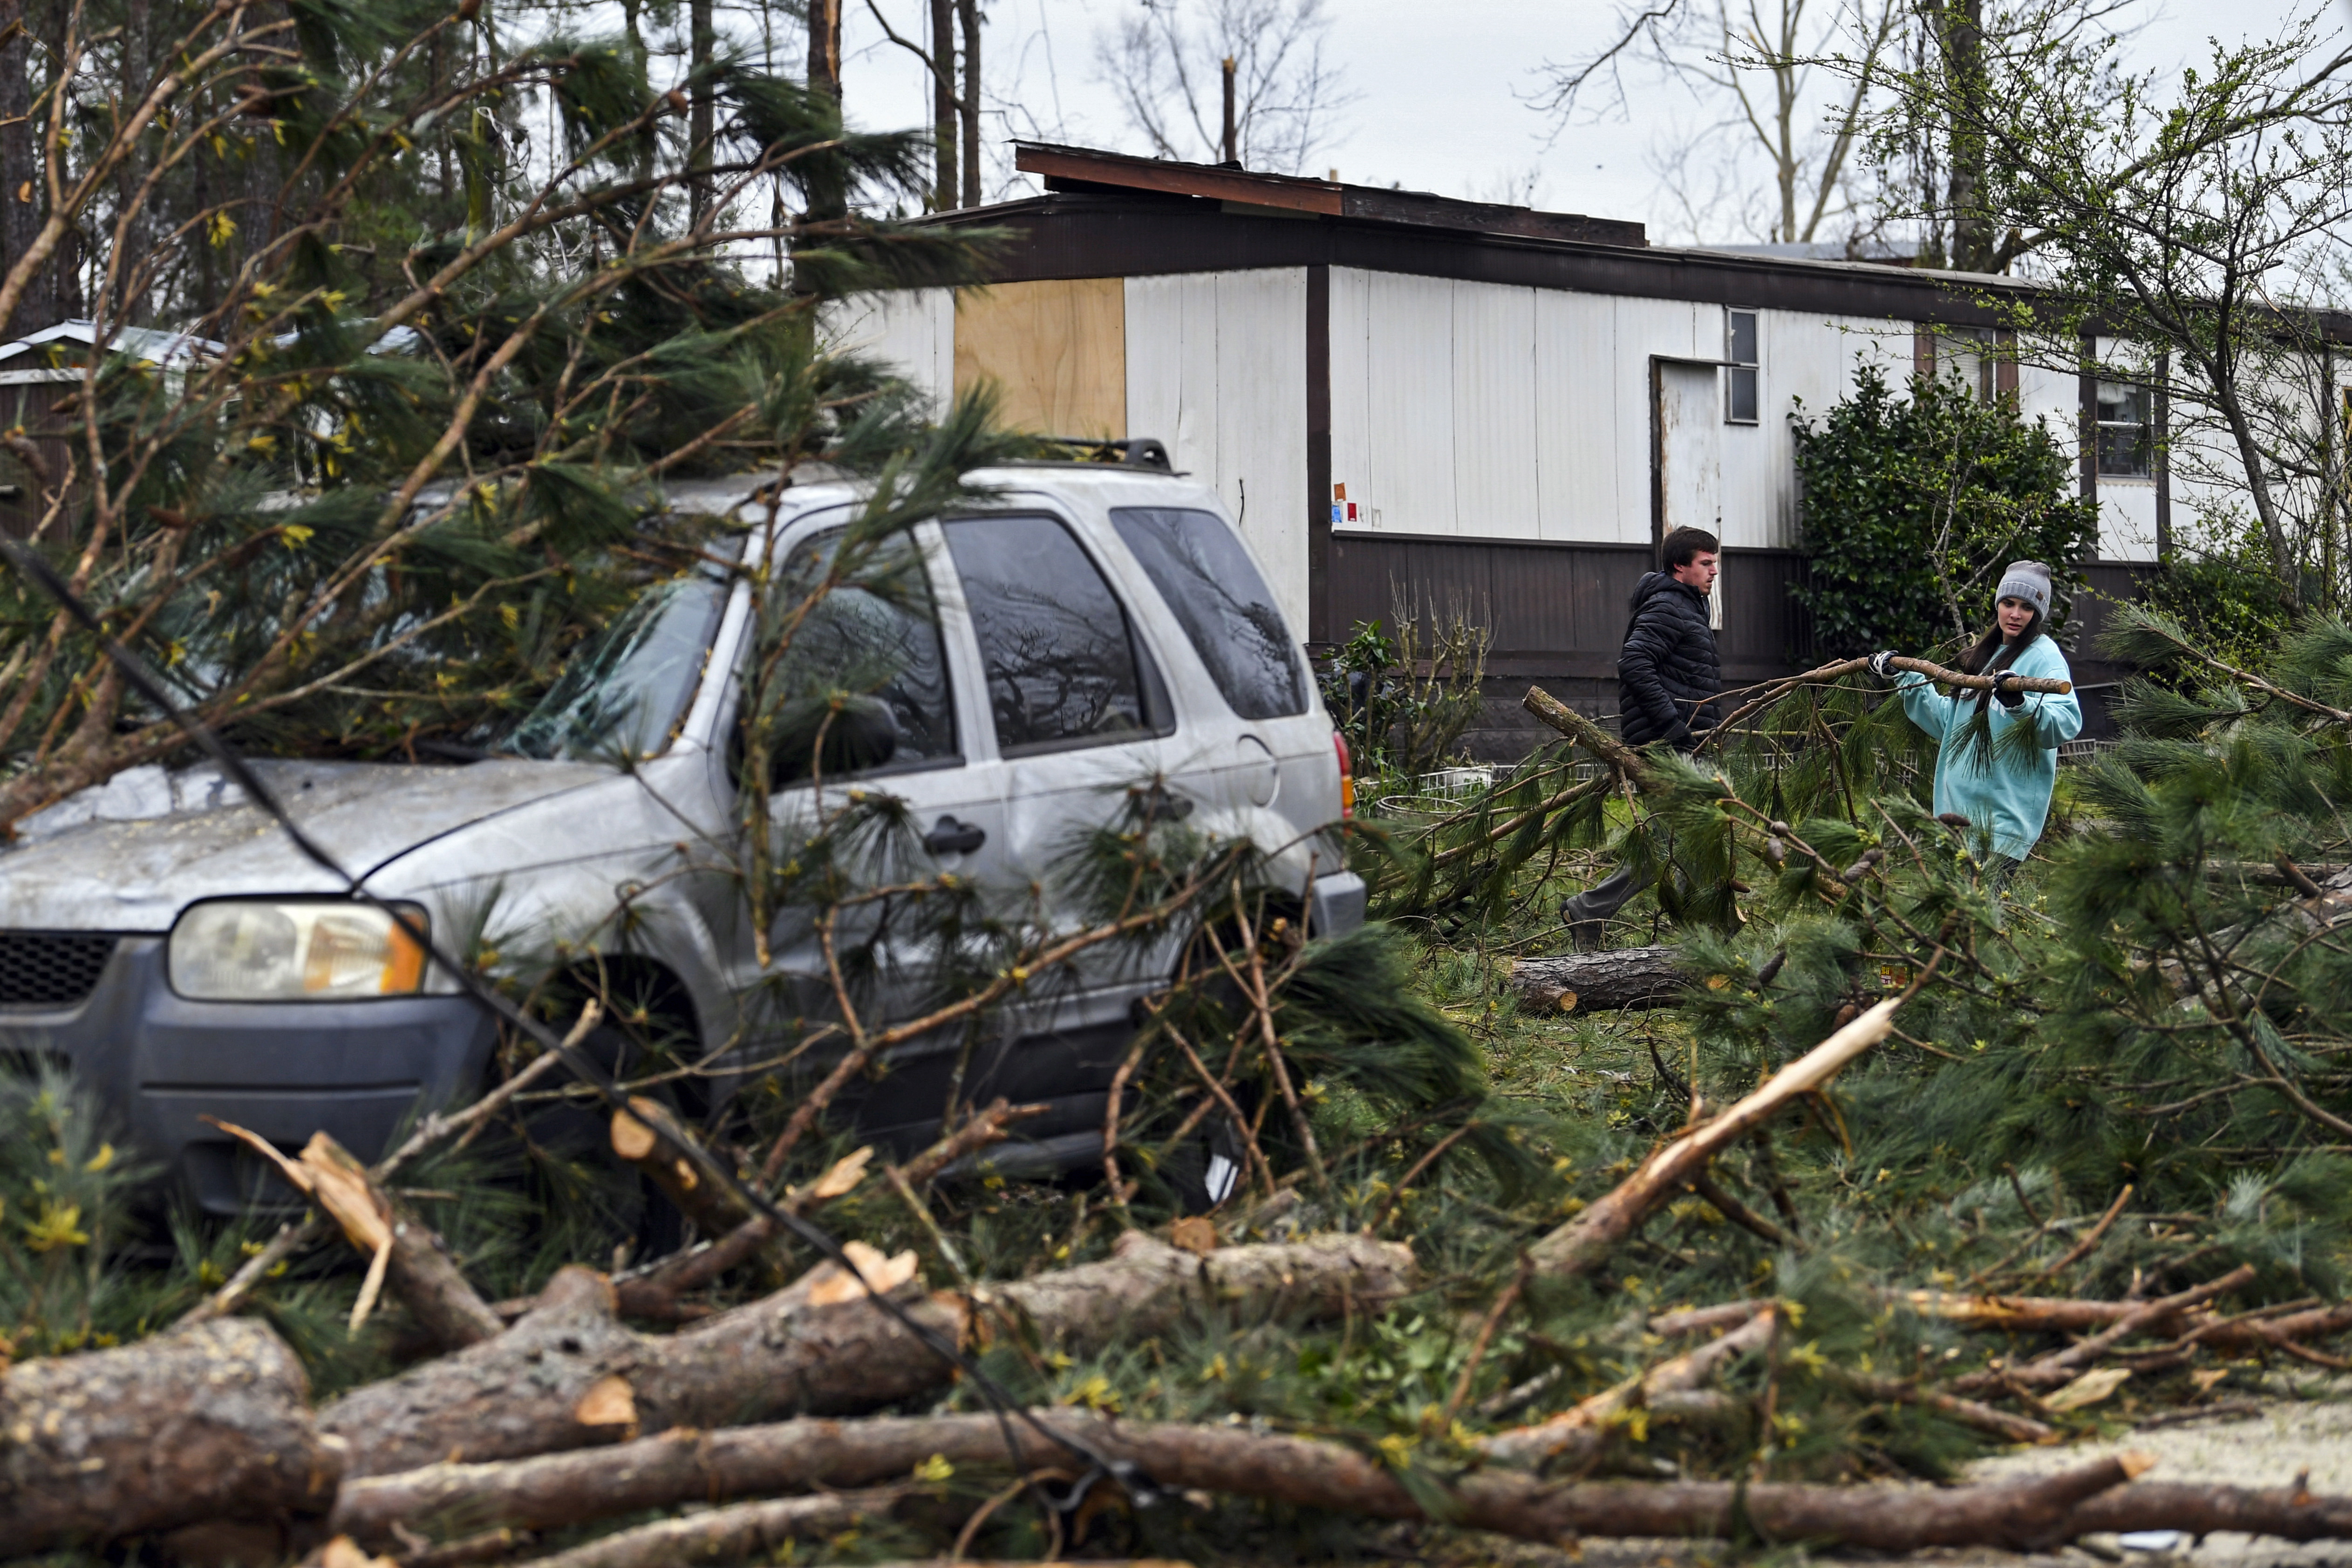 epa07413524 Volunteers from the community help clear debris from an area which the previsou day was hit by a tornado, in Beauregard, Alabama, USA, 04 March 2019. So far 23 in the state are confirmed dead.  EPA/John Amis